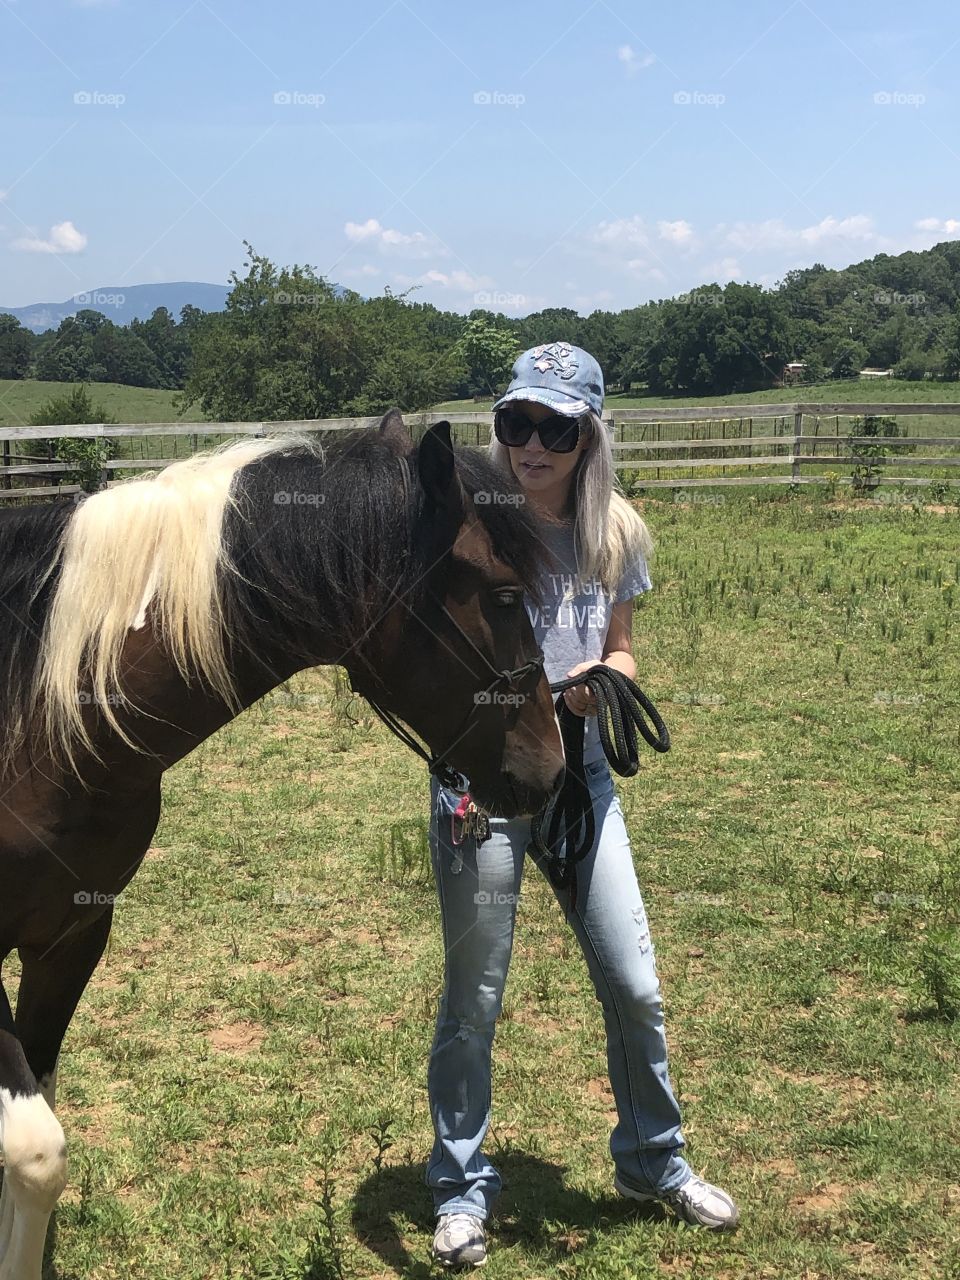 Just another shot of this beauty Pinto Paso Fino with me leading him.  He’s the sweetest horse!  SC horse country is a southern girl’s local treasure. You can spend all day just staring at all the beauty that nature provides here. 🐴